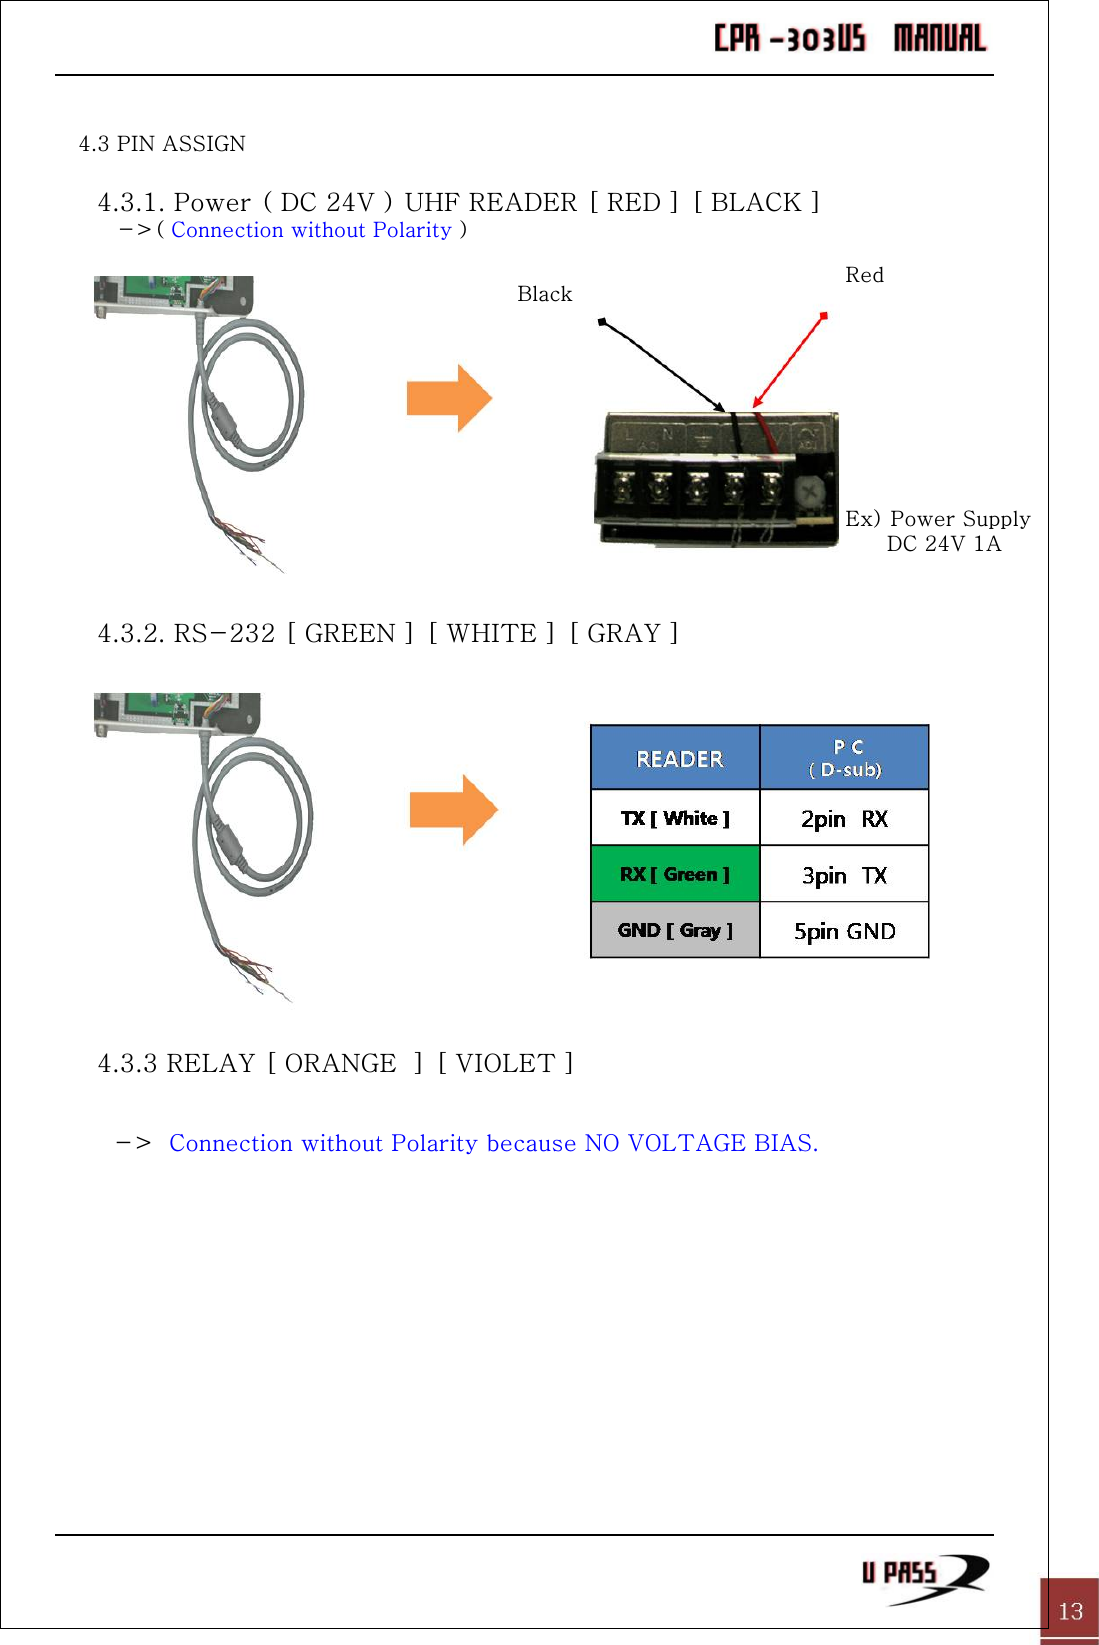 4.3 PIN ASSIGN4.3.1. Power ( DC 24V ) UHF READER [ RED ] [ BLACK ]    -&gt;( Connection without Polarity )4.3.2. RS-232 [ GREEN ] [ WHITE ] [ GRAY ]  -&gt;  Connection without Polarity because NO VOLTAGE BIAS.  4.3.3 RELAY [ ORANGE  ] [ VIOLET ]     Black RedEx) Power Supply       DC 24V 1A